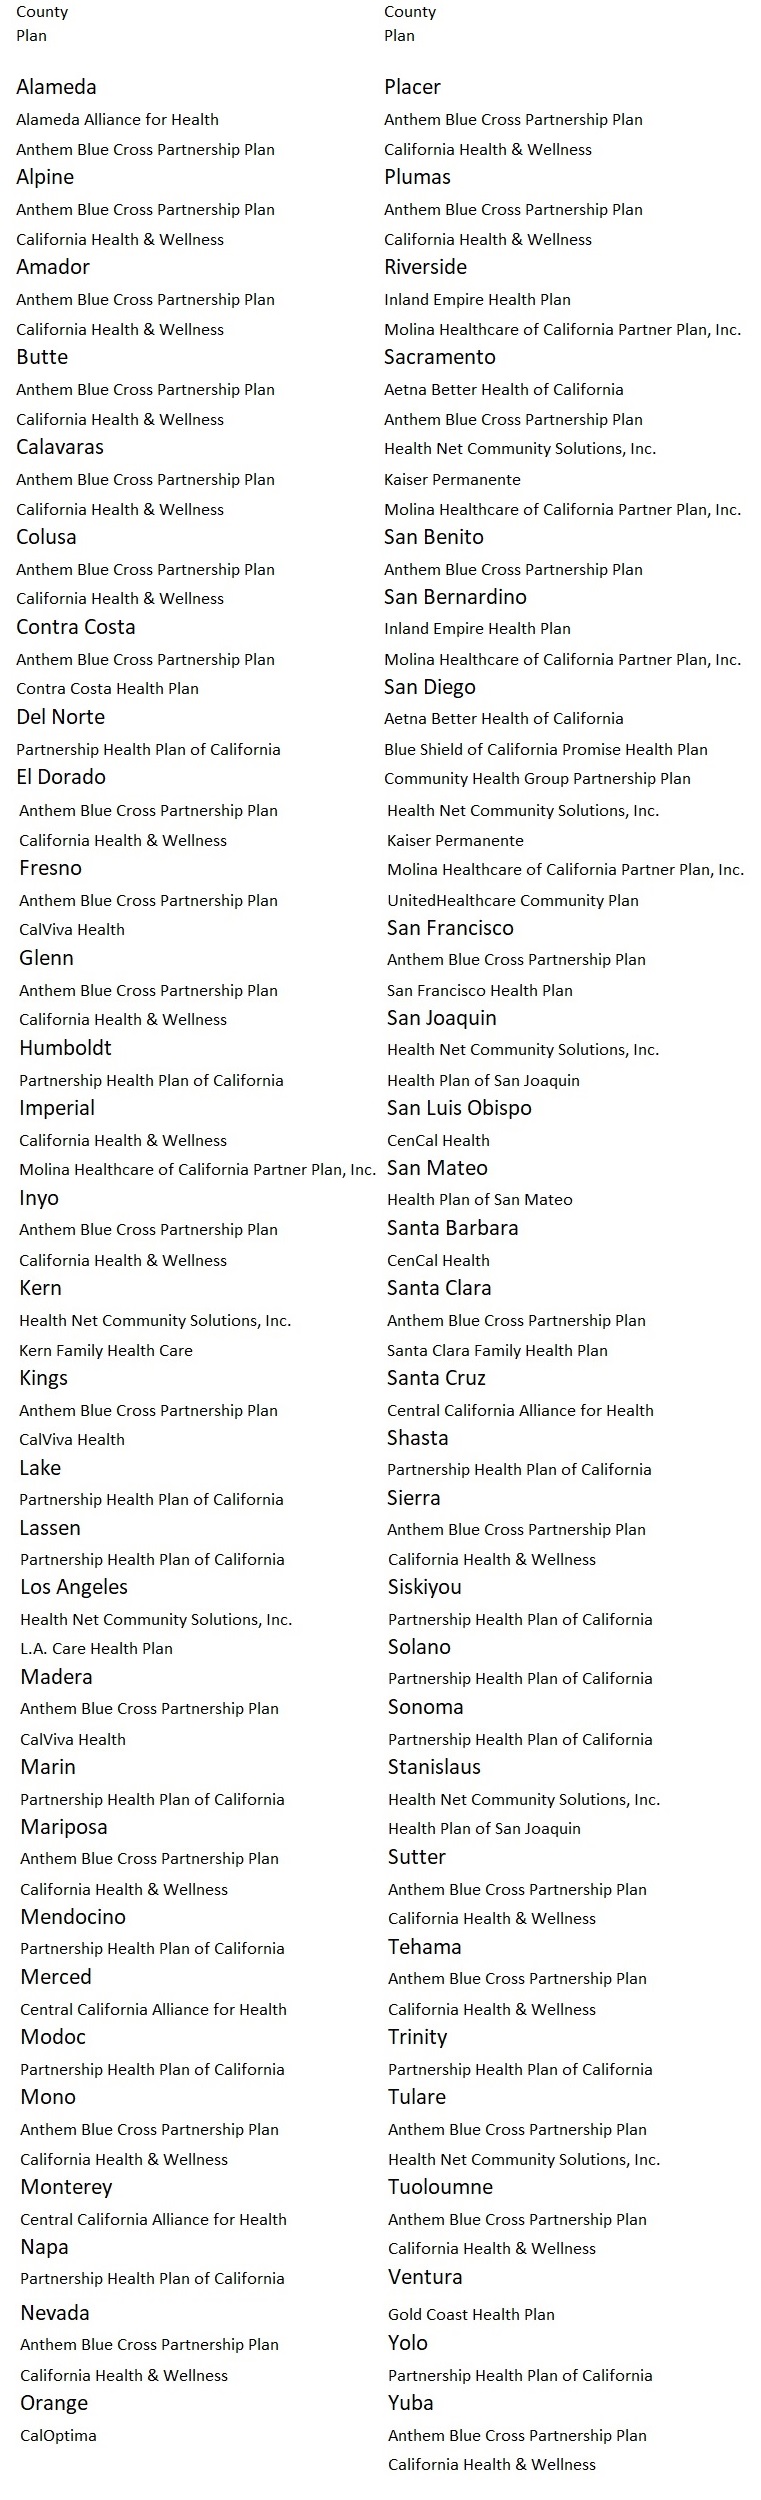 Medi-Cal health plans by county